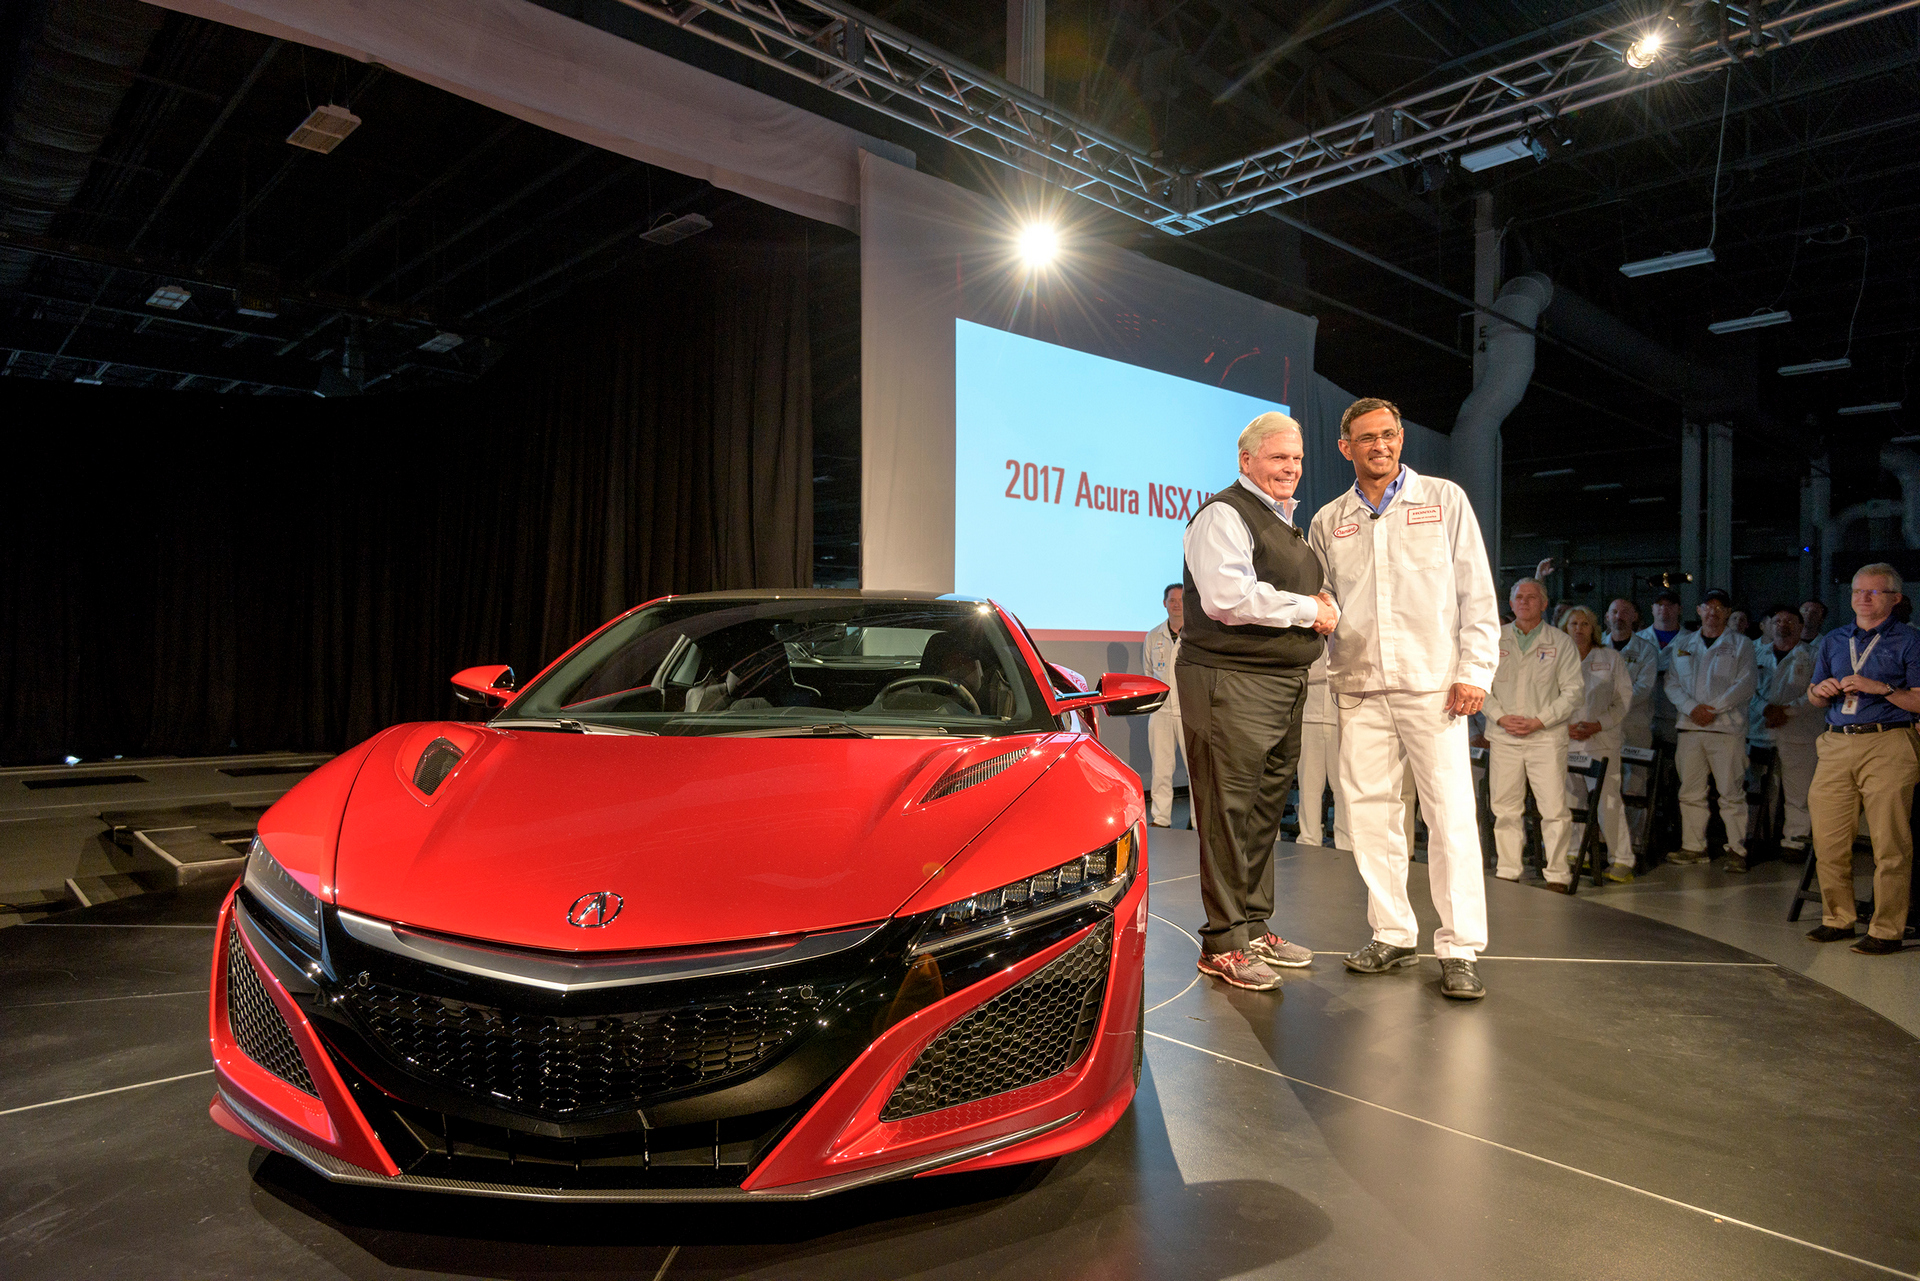 From left, Rick Hendrick, owner of Hendrick Motorsports and Hendrick Automotive Group, takes delivery of 2017 Acura NSX, VIN 001, from Acura NSX Engineering Large Project Leader Clement D'Souza © Honda Motor Co., Ltd.